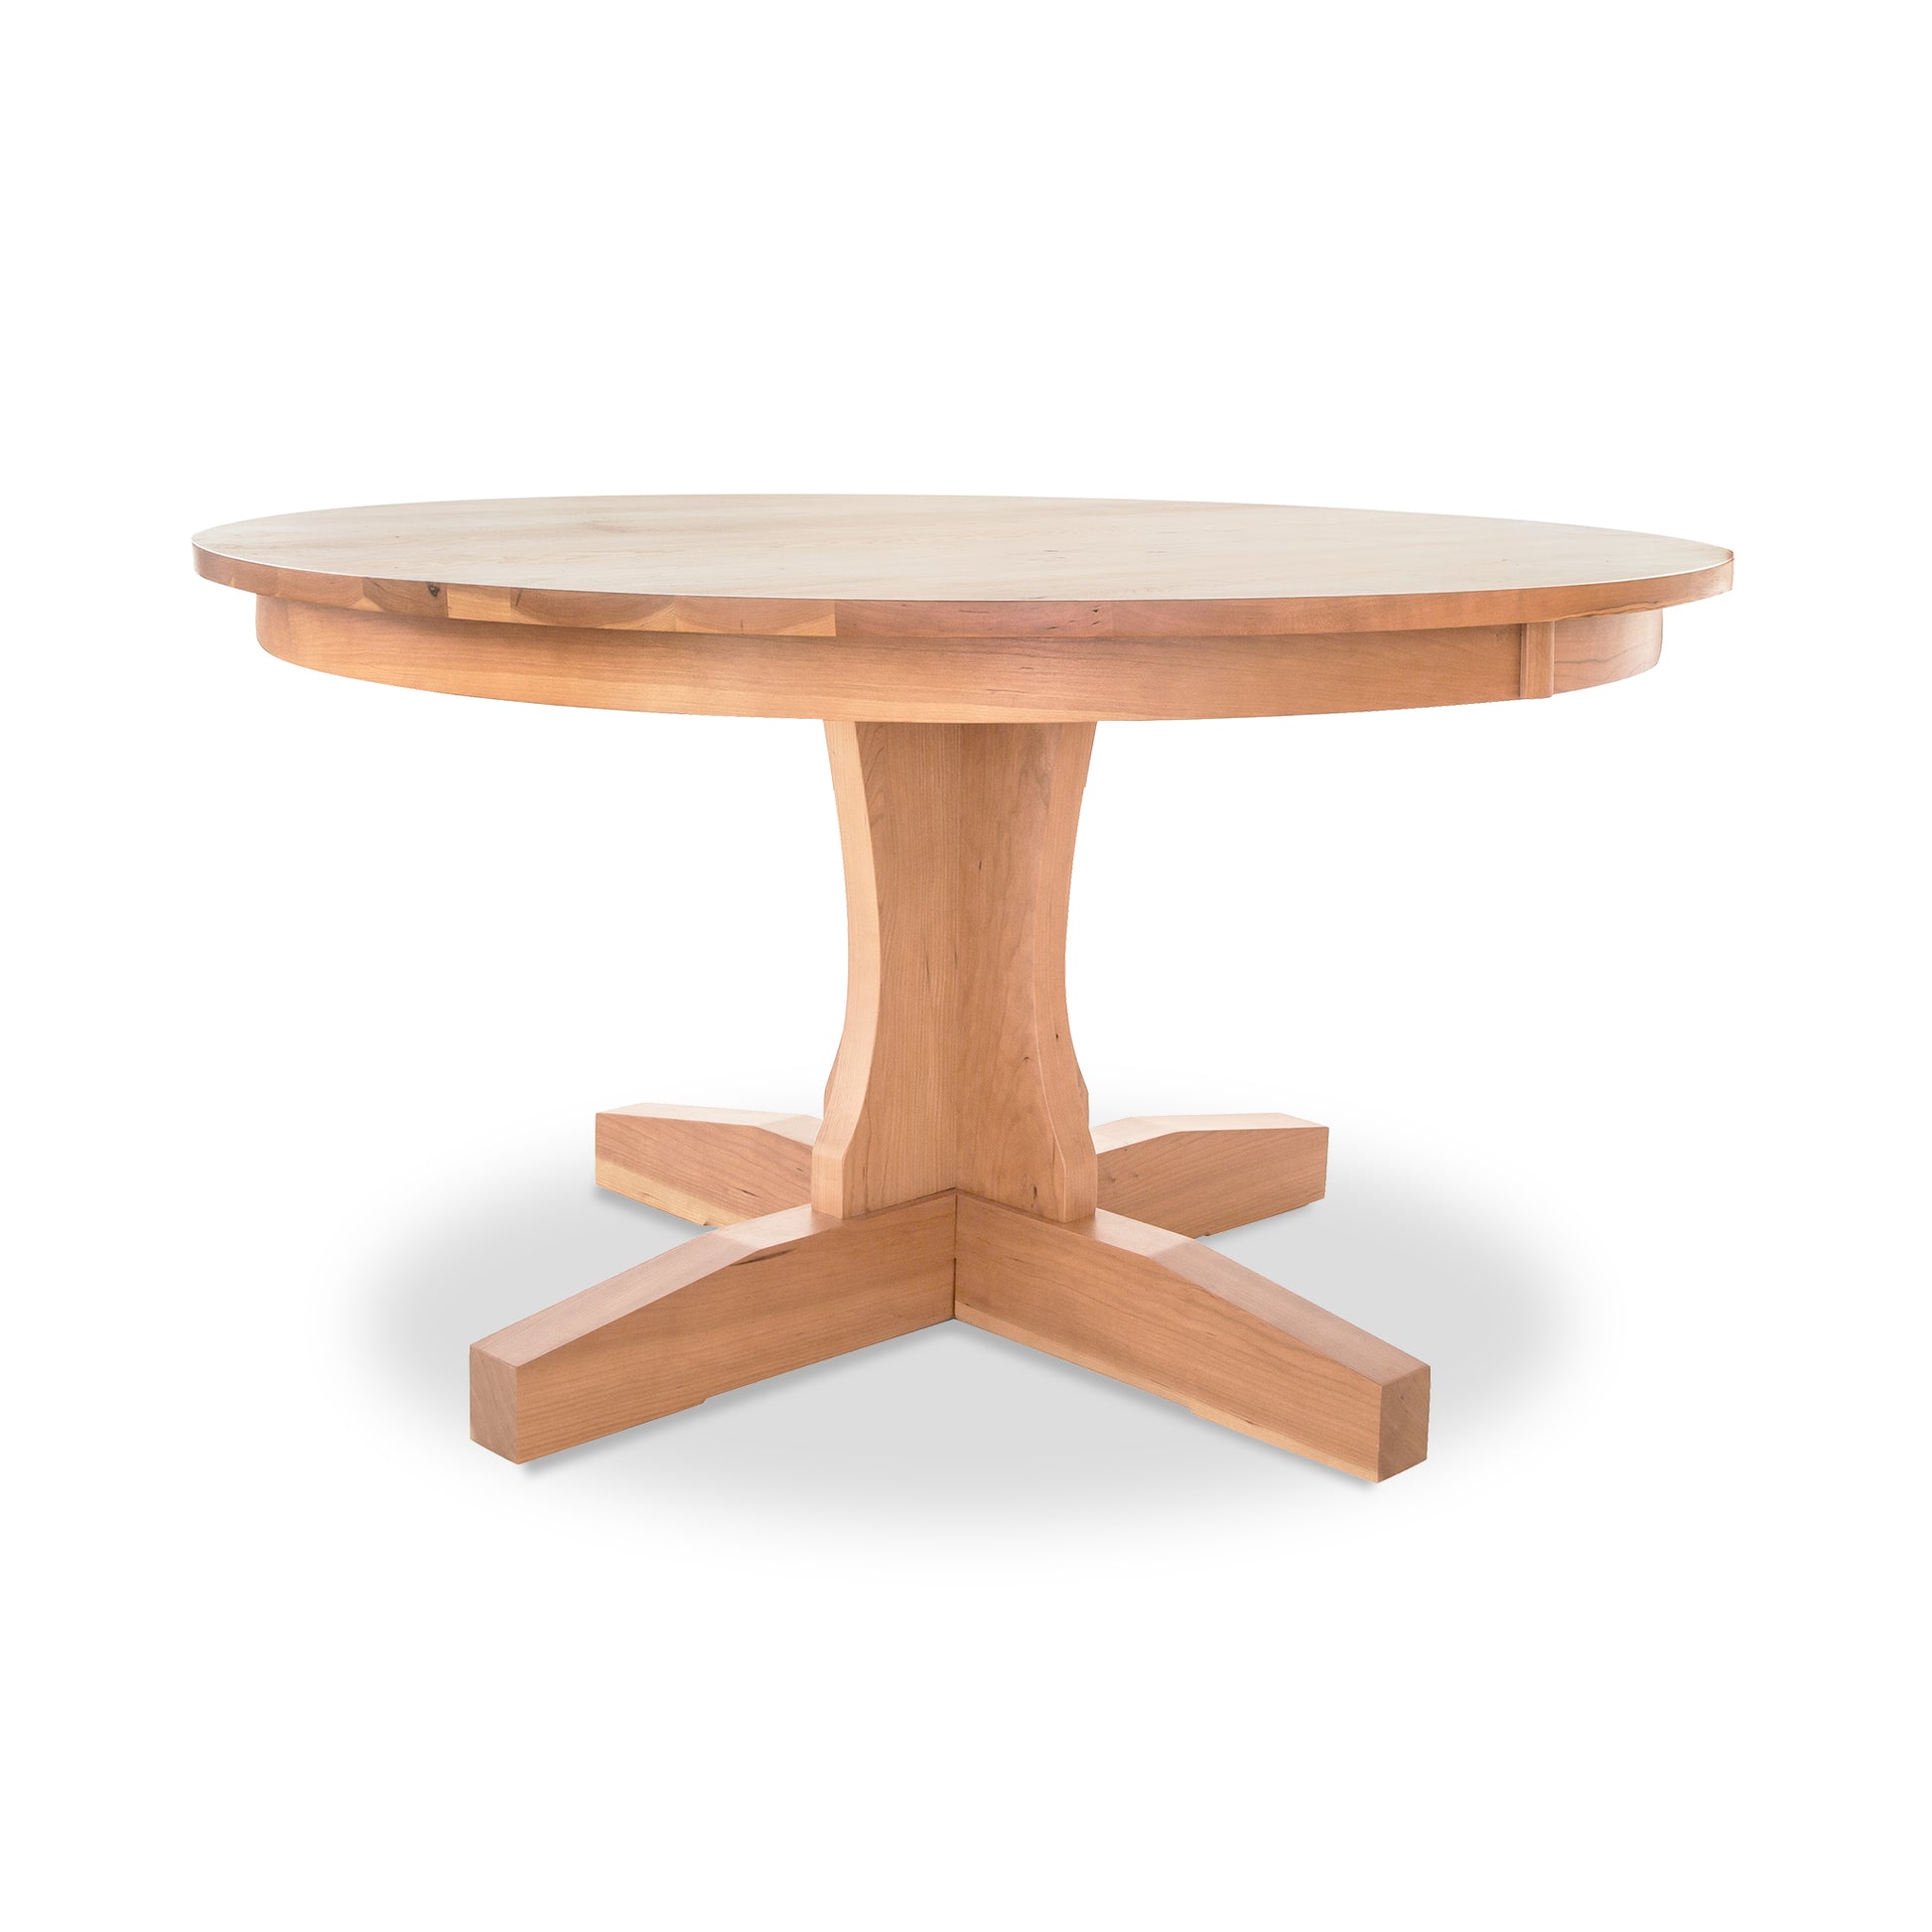 A Lyndon Furniture New Traditions Round Pedestal Table with four legs and a natural finish on a white background.